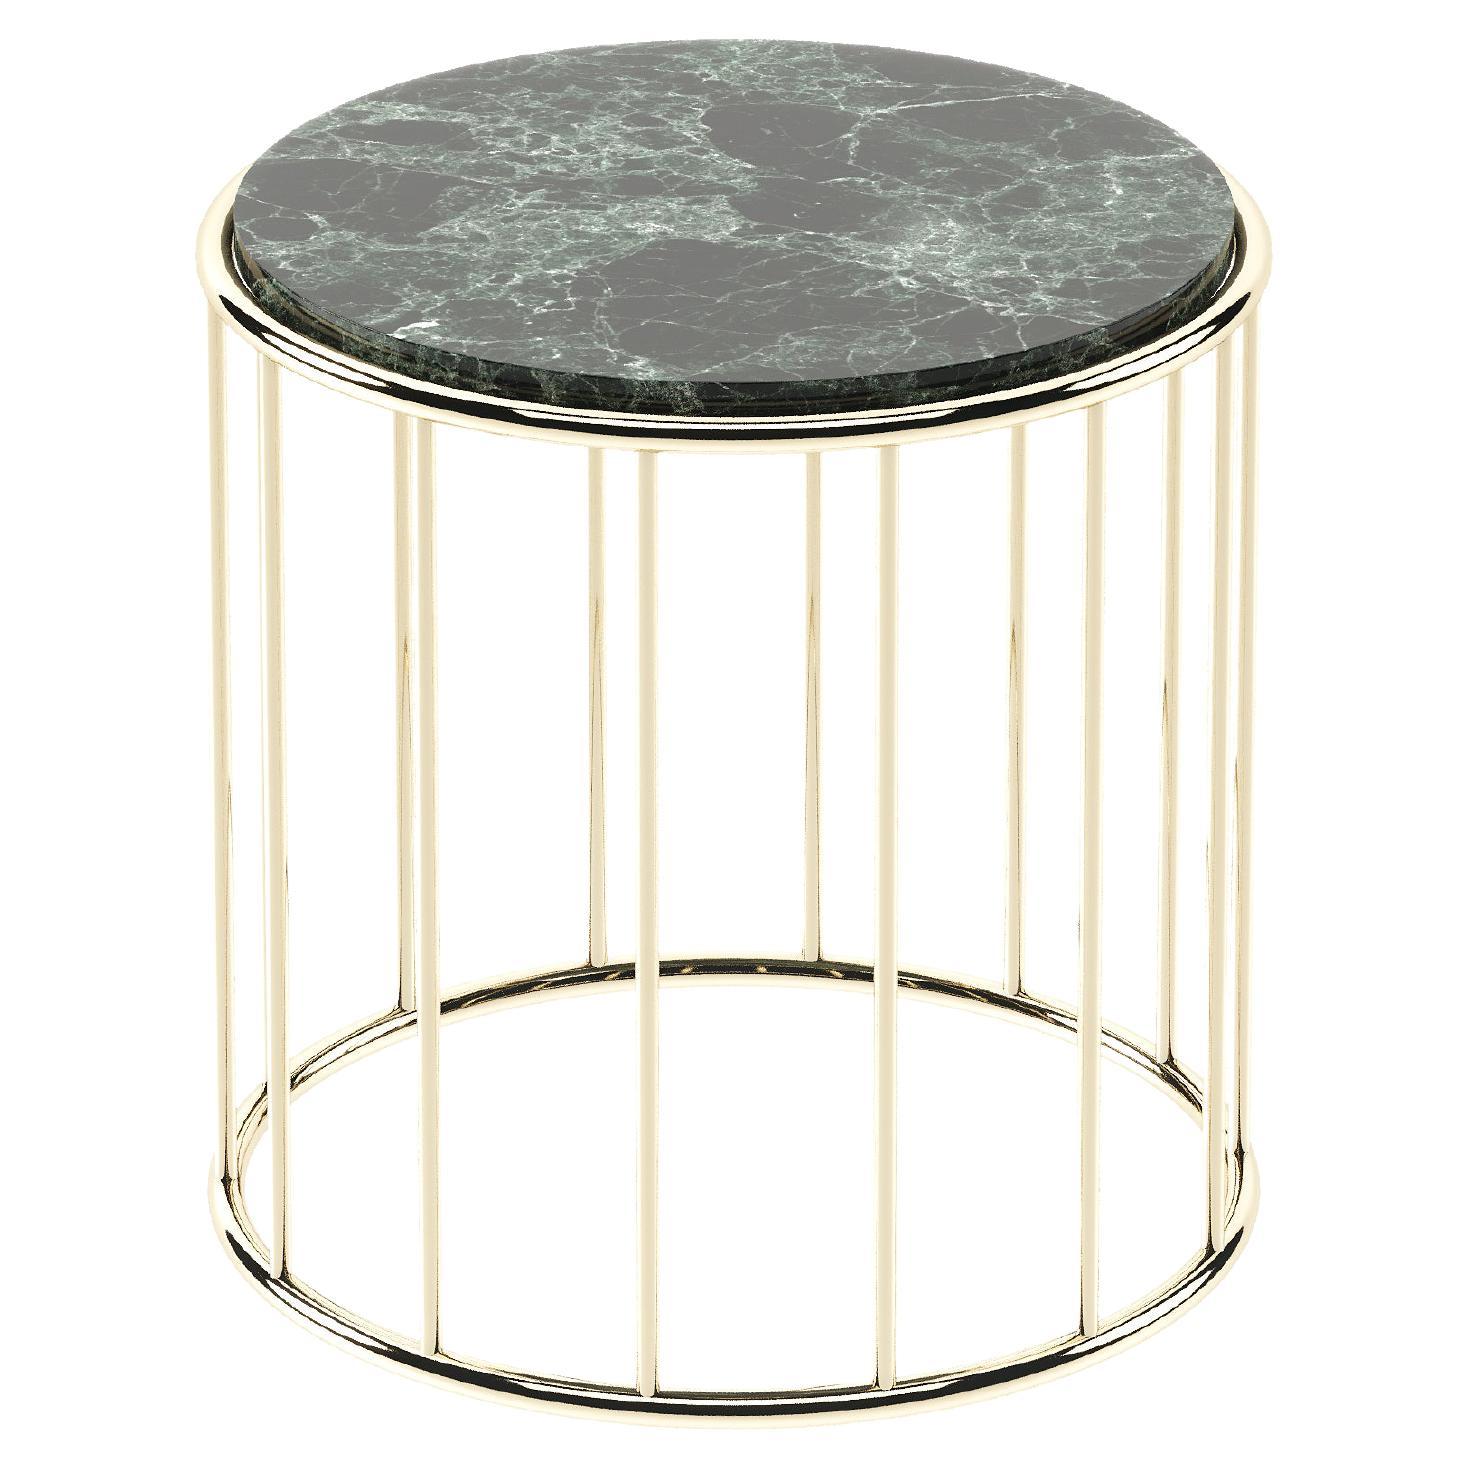 Still Side Table in Marble, Portuguese 21st Century Contemporary Design For Sale